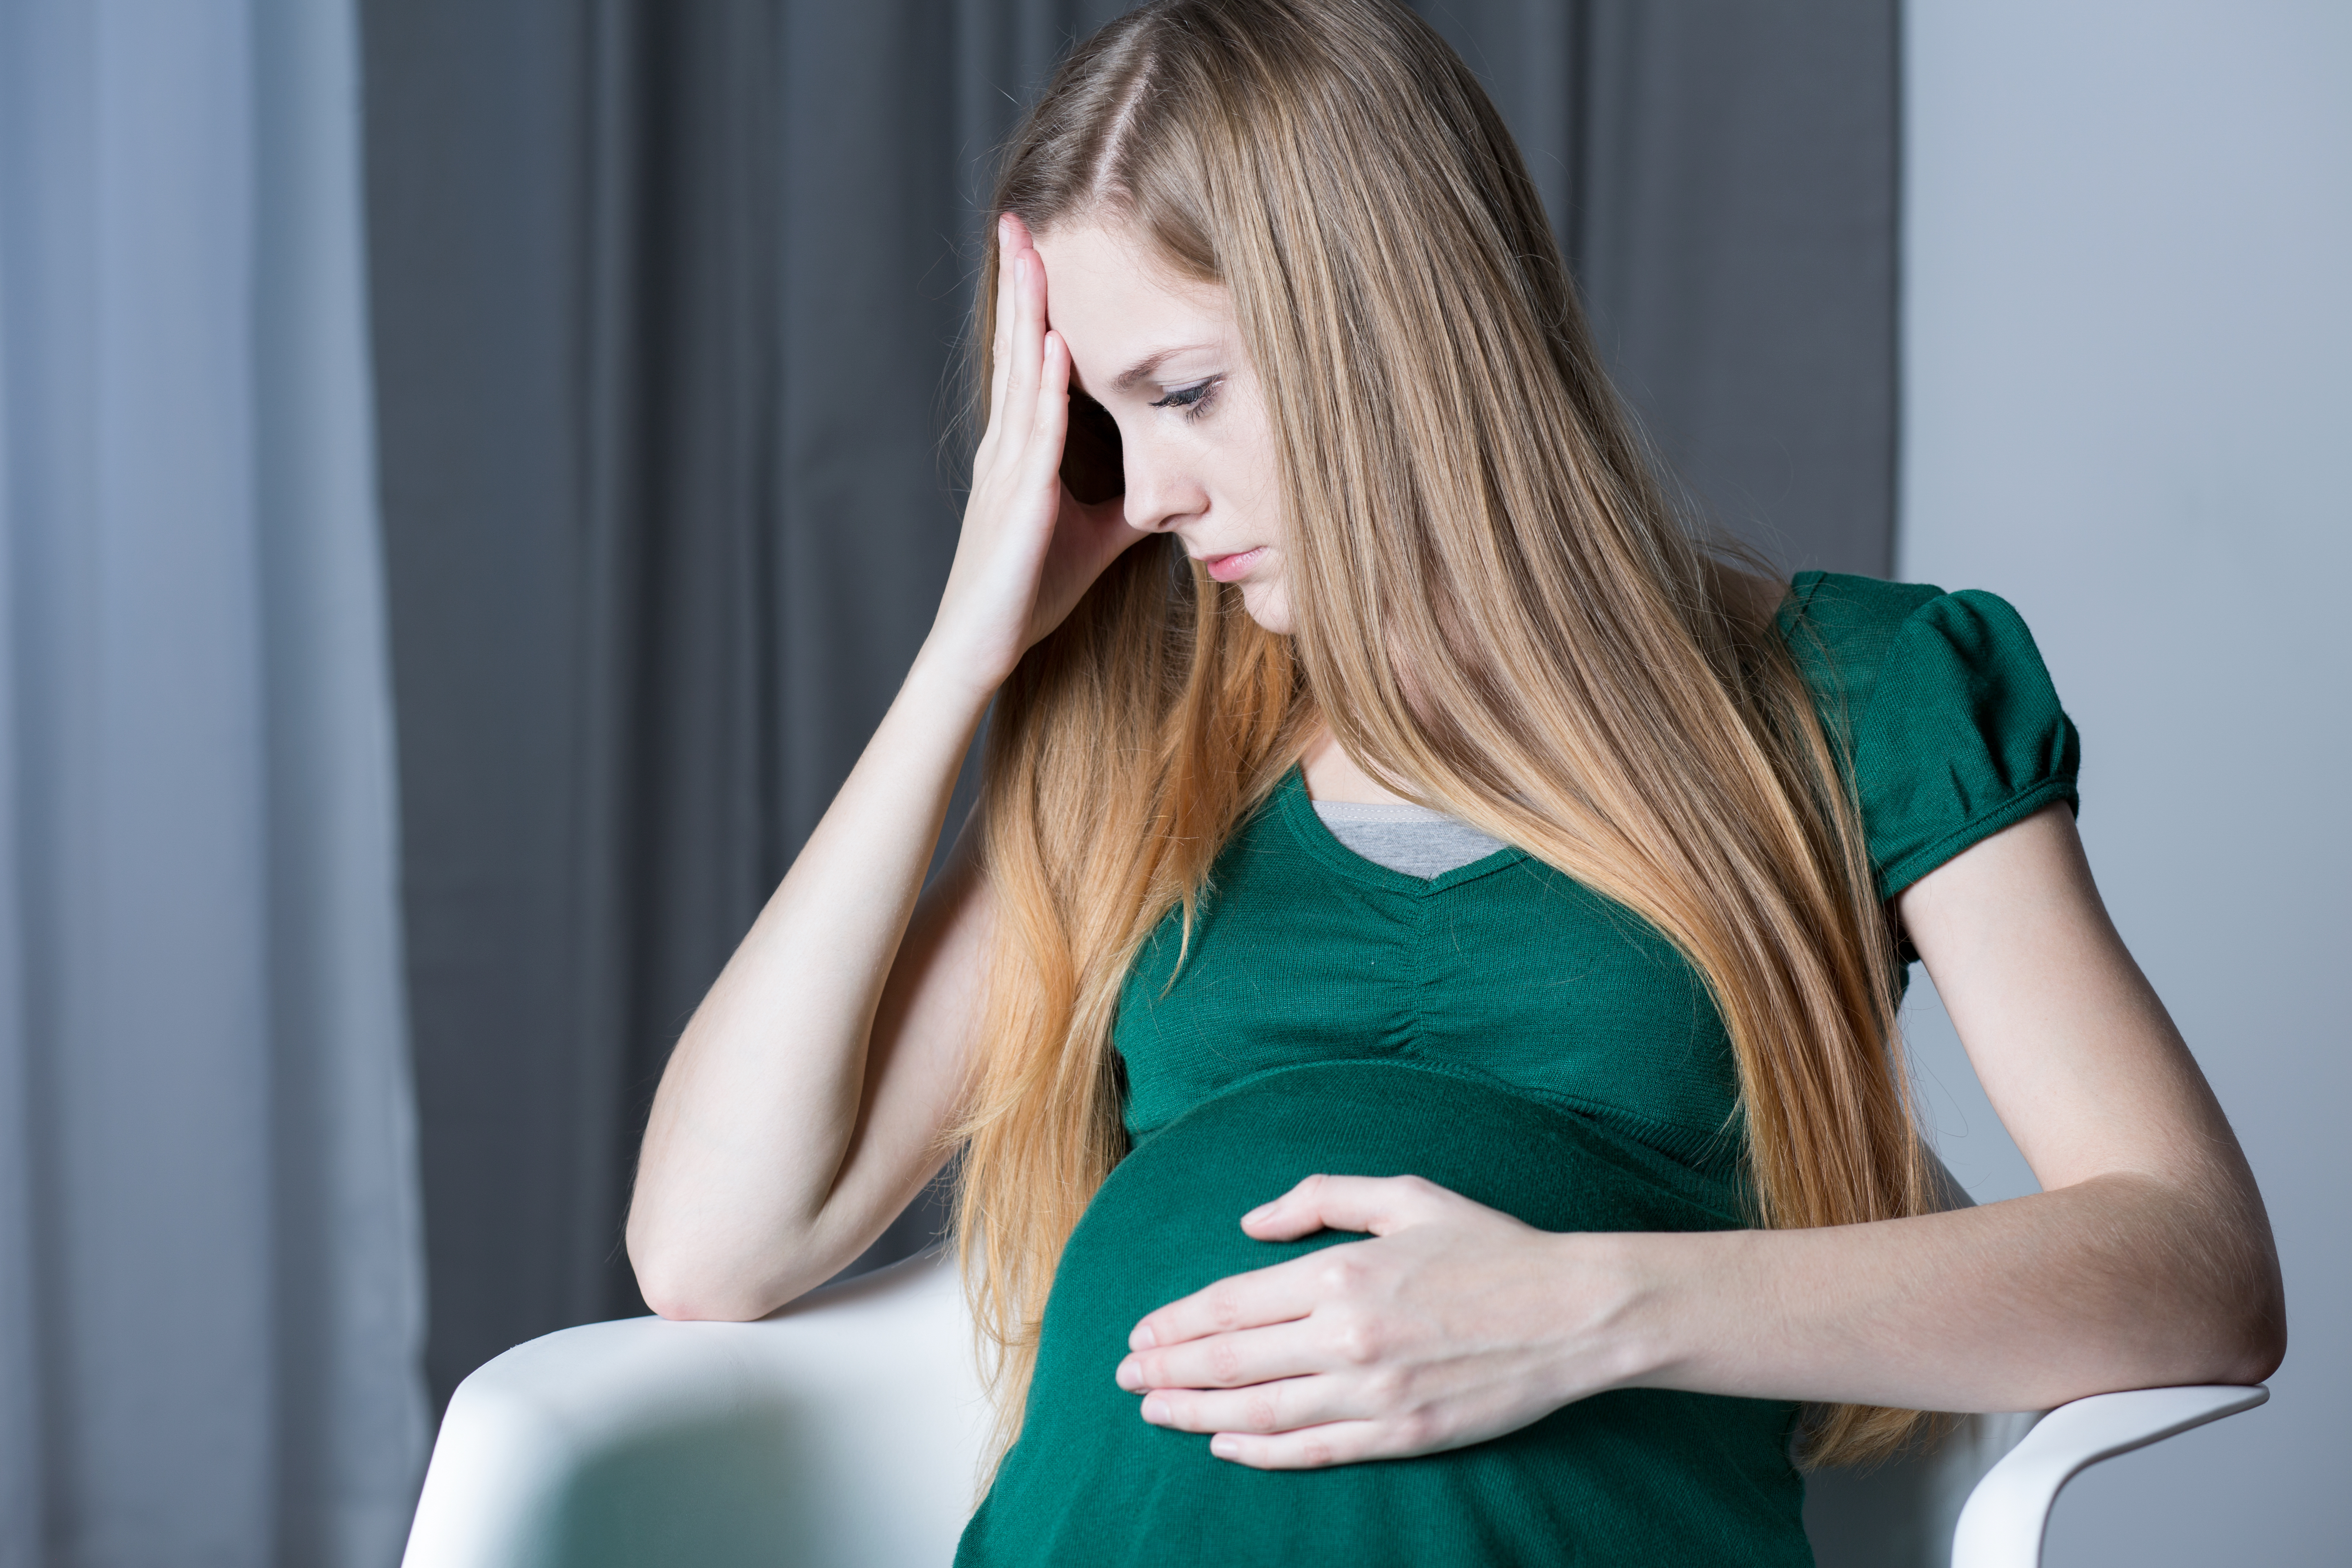 A stressed pregnant teenager | Source: Shutterstock